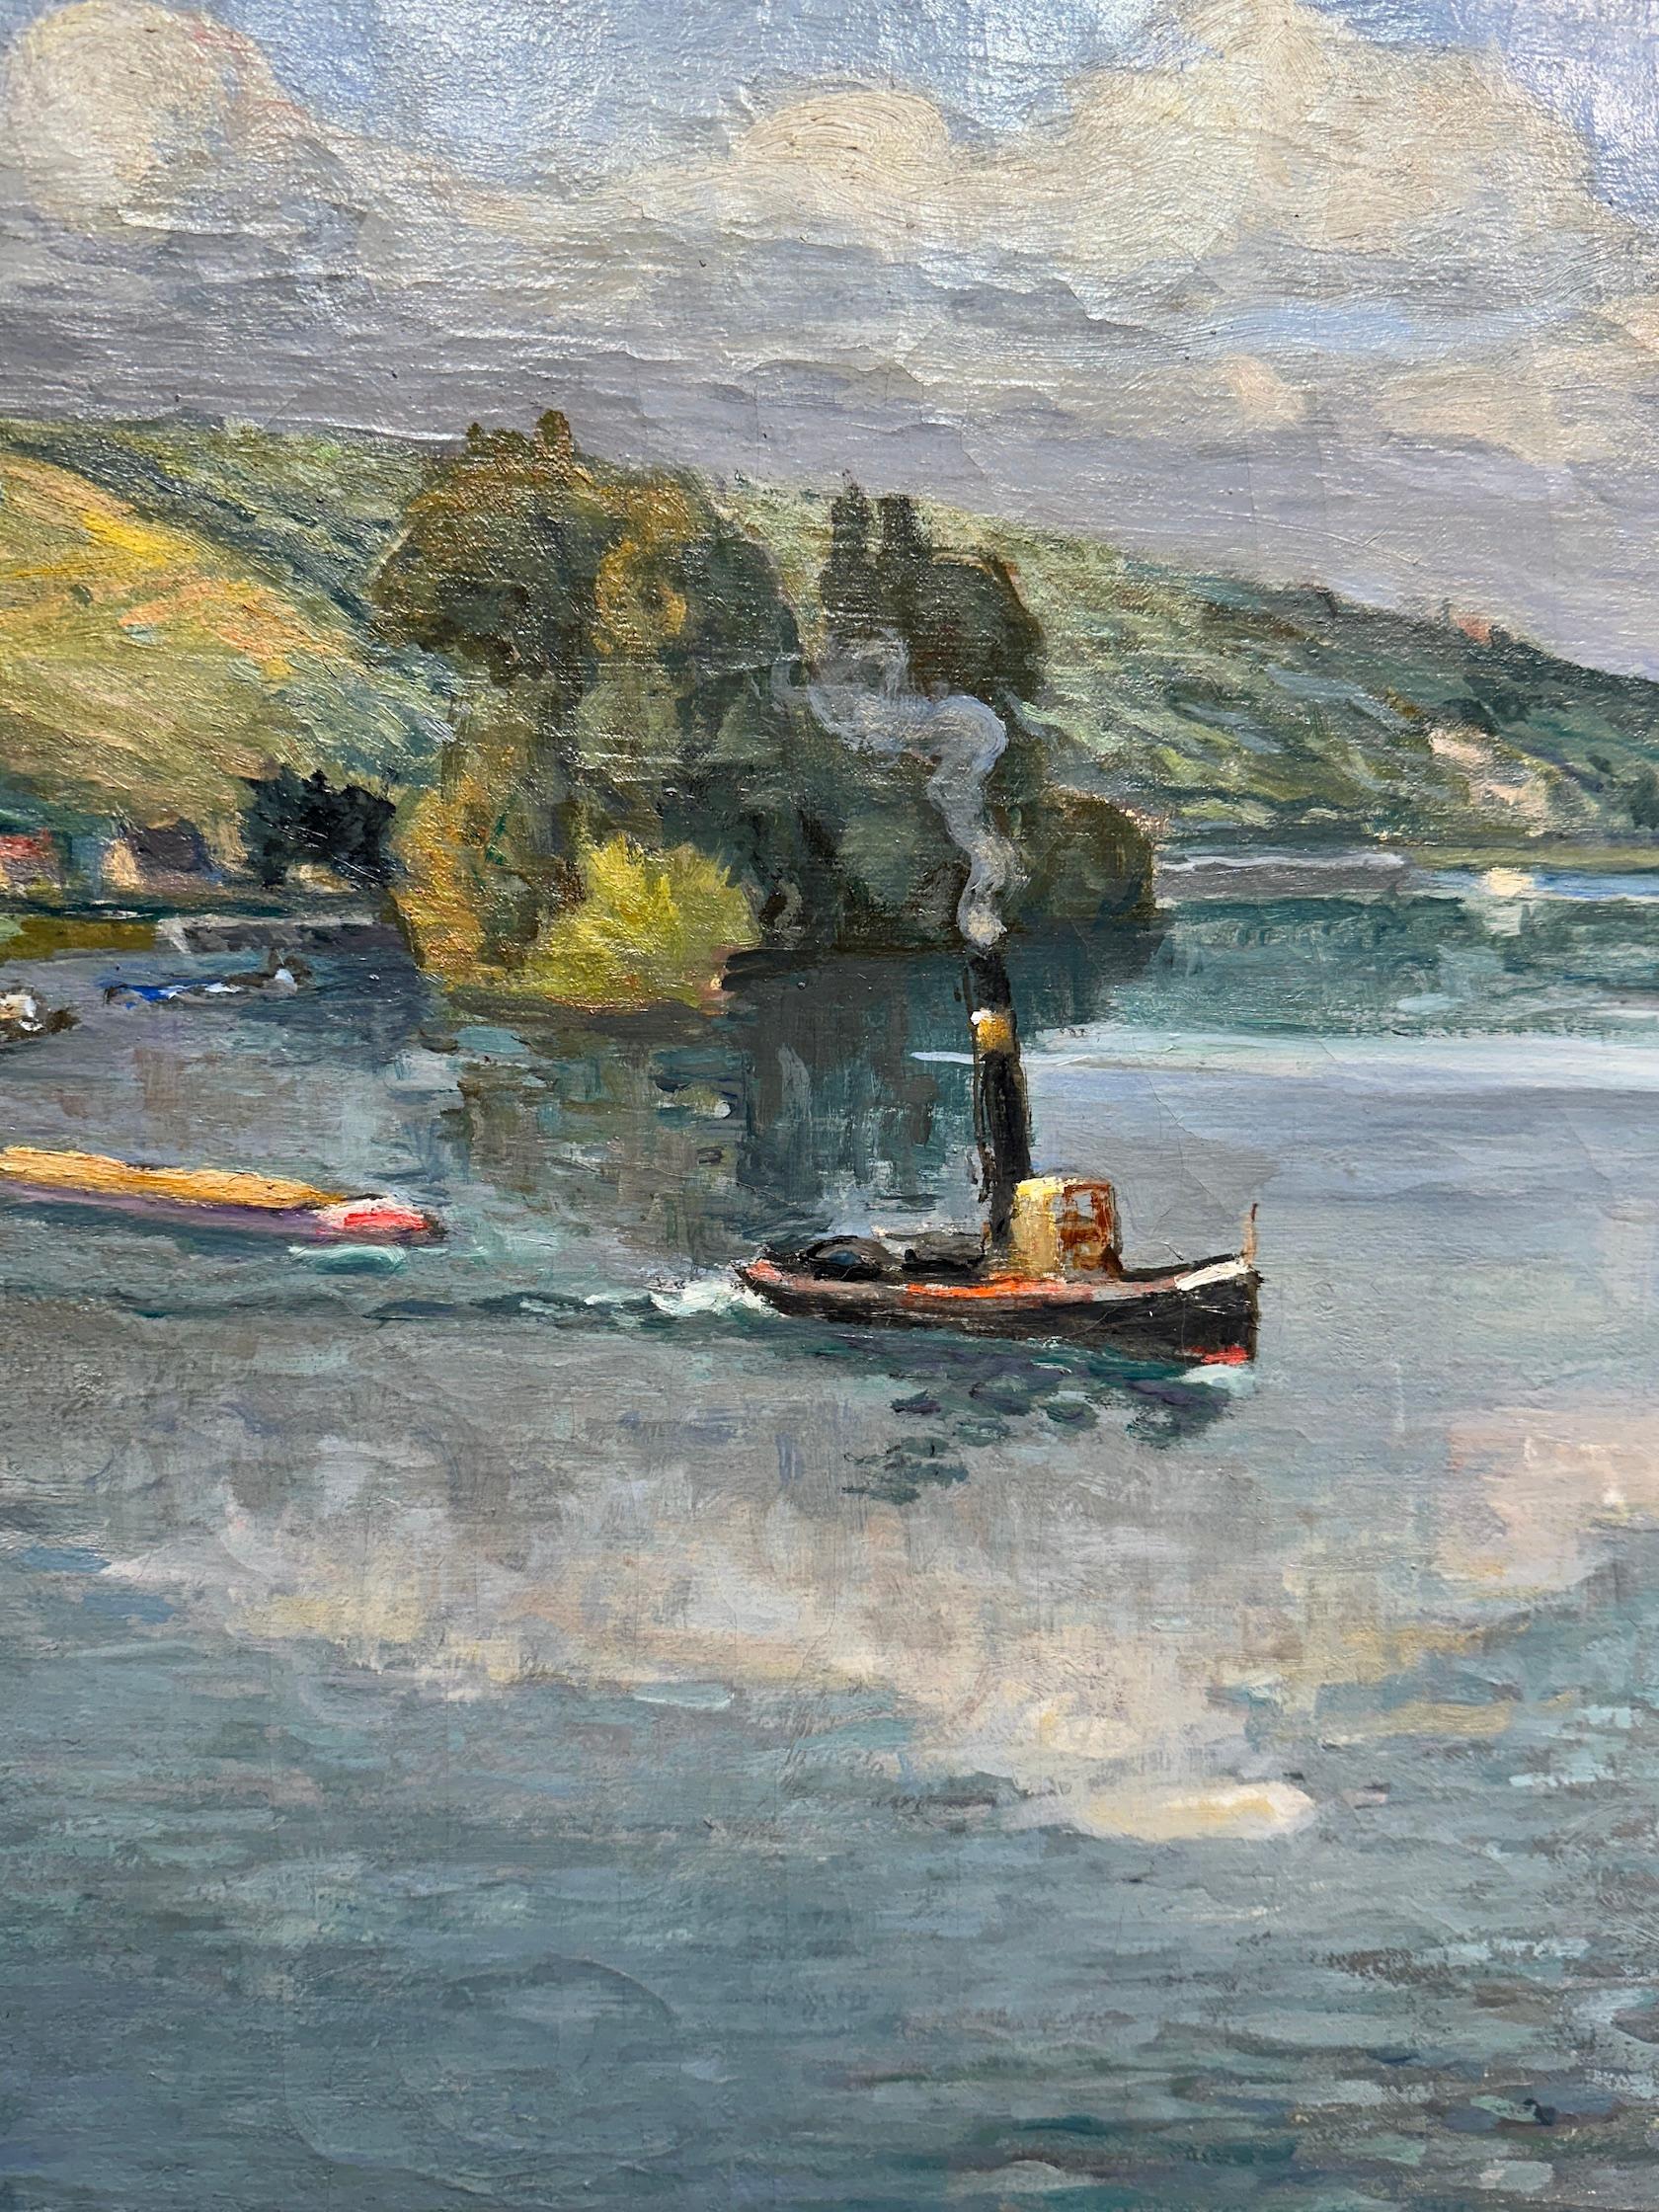 Impressionist French River landscape, with boats, a boat house.

Rolleboise on the Seine

Choosing to acquire a French 1950s Impressionist river landscape by Frederic Luce is an opportunity to own a piece of art that encapsulates the essence of